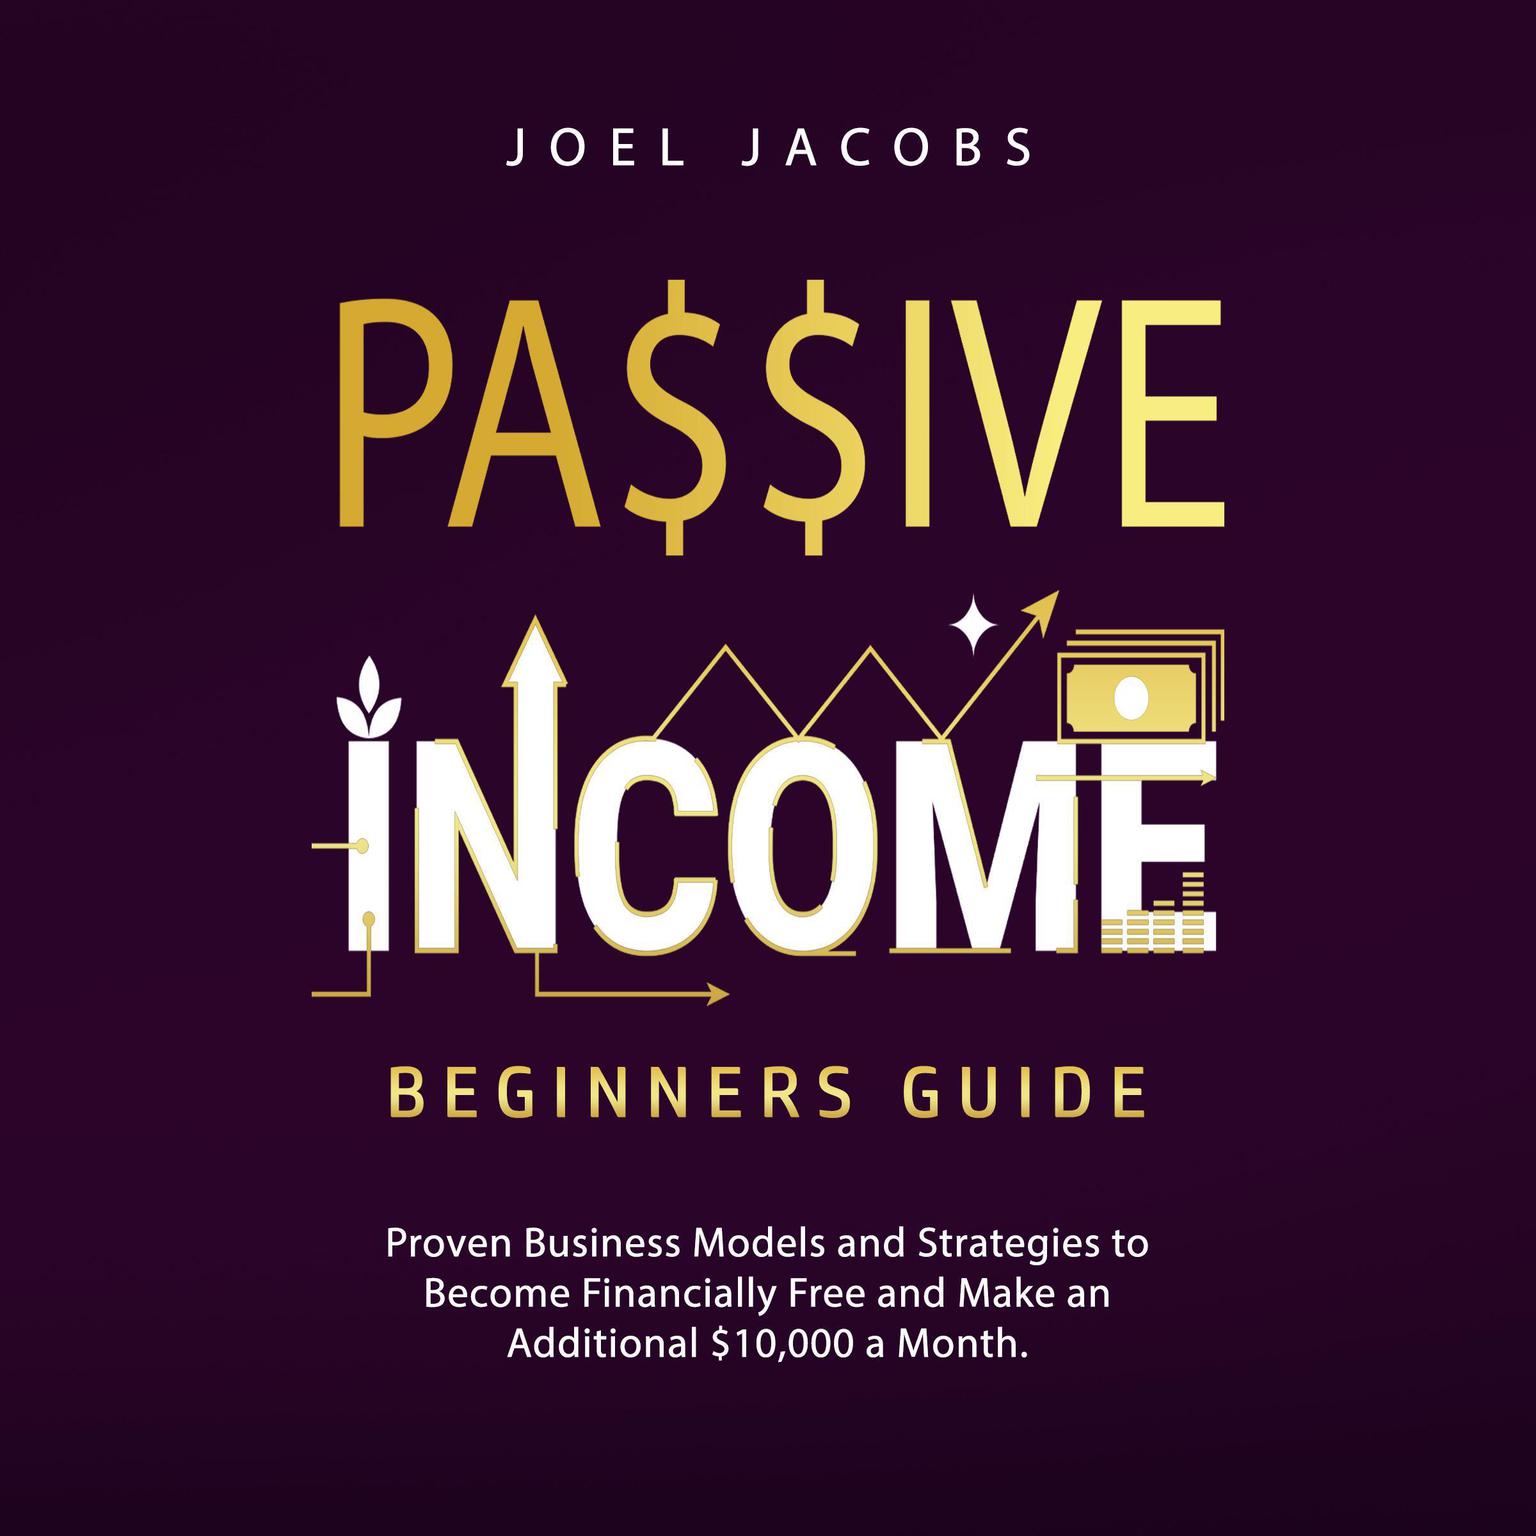 Passive Income – Beginners Guide: Proven Business Models and Strategies to Become Financially Free and Make an Additional $10,000 a Month Audiobook, by Joel Jacobs